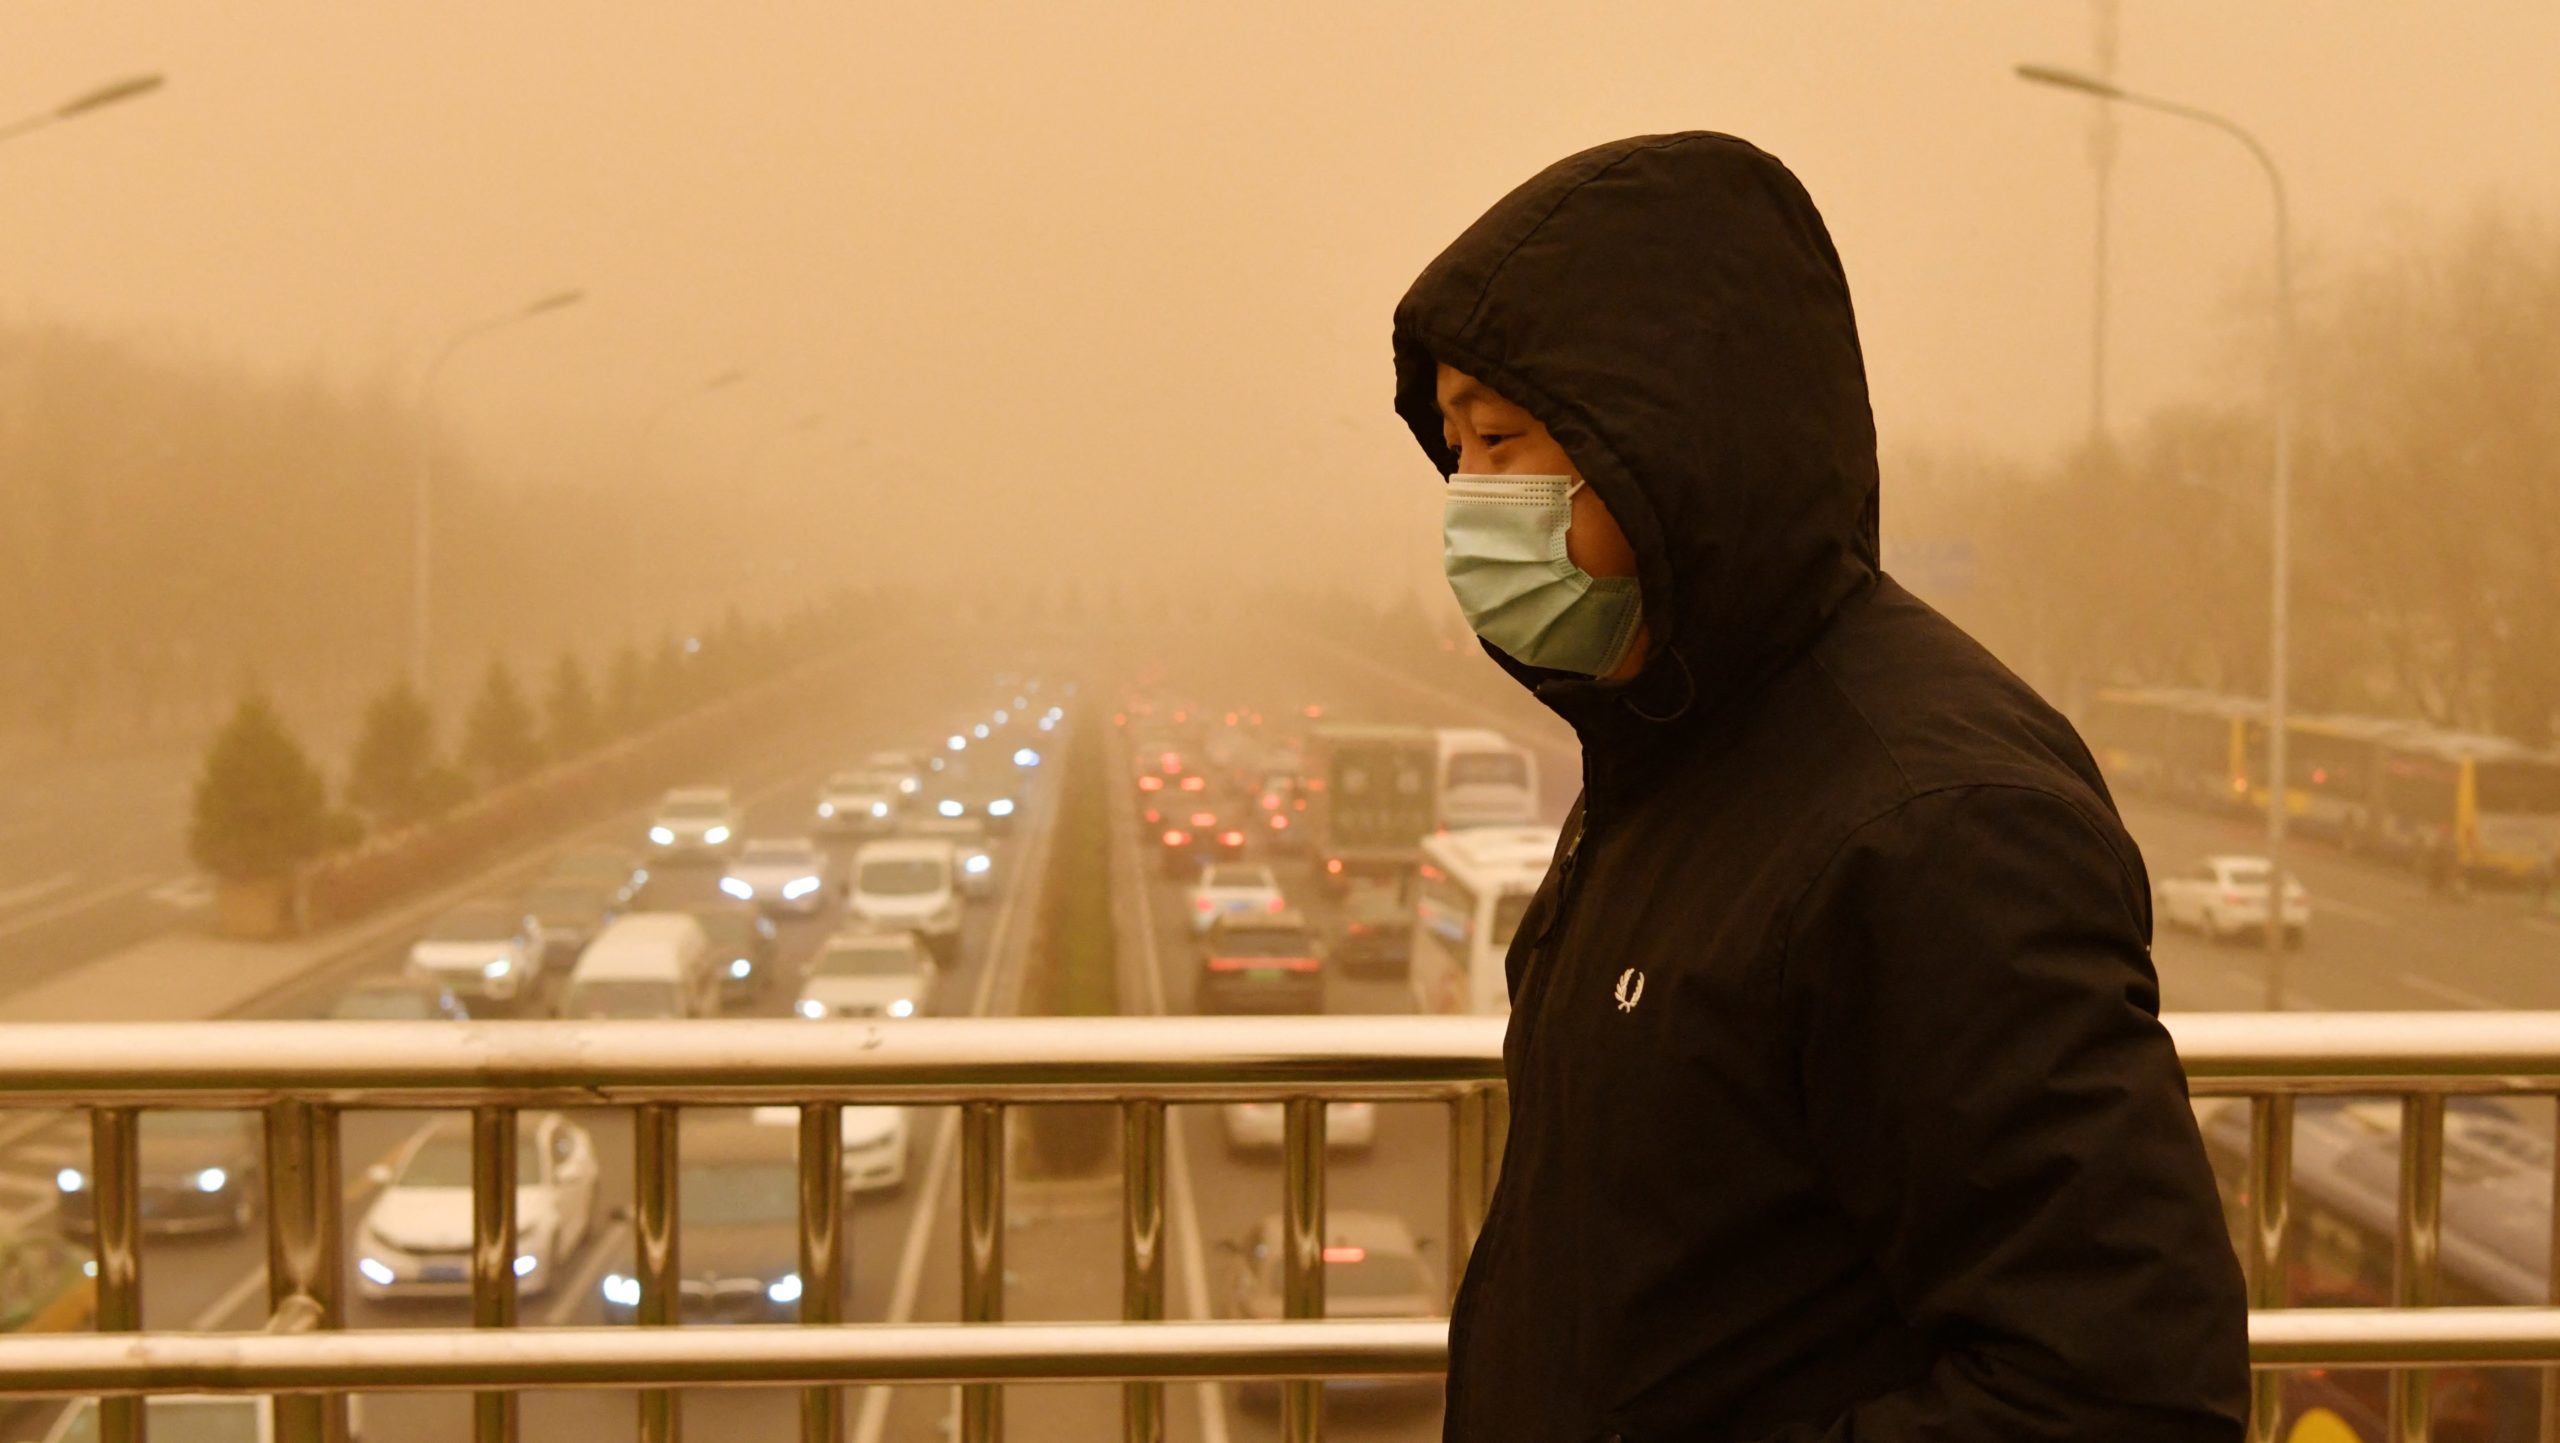 A man walks on a pedestrian overbridge during a sandstorm in Beijing as traffic crawls in the background on March 15, 2021. (Photo: Greg Baker/AFP, Getty Images)